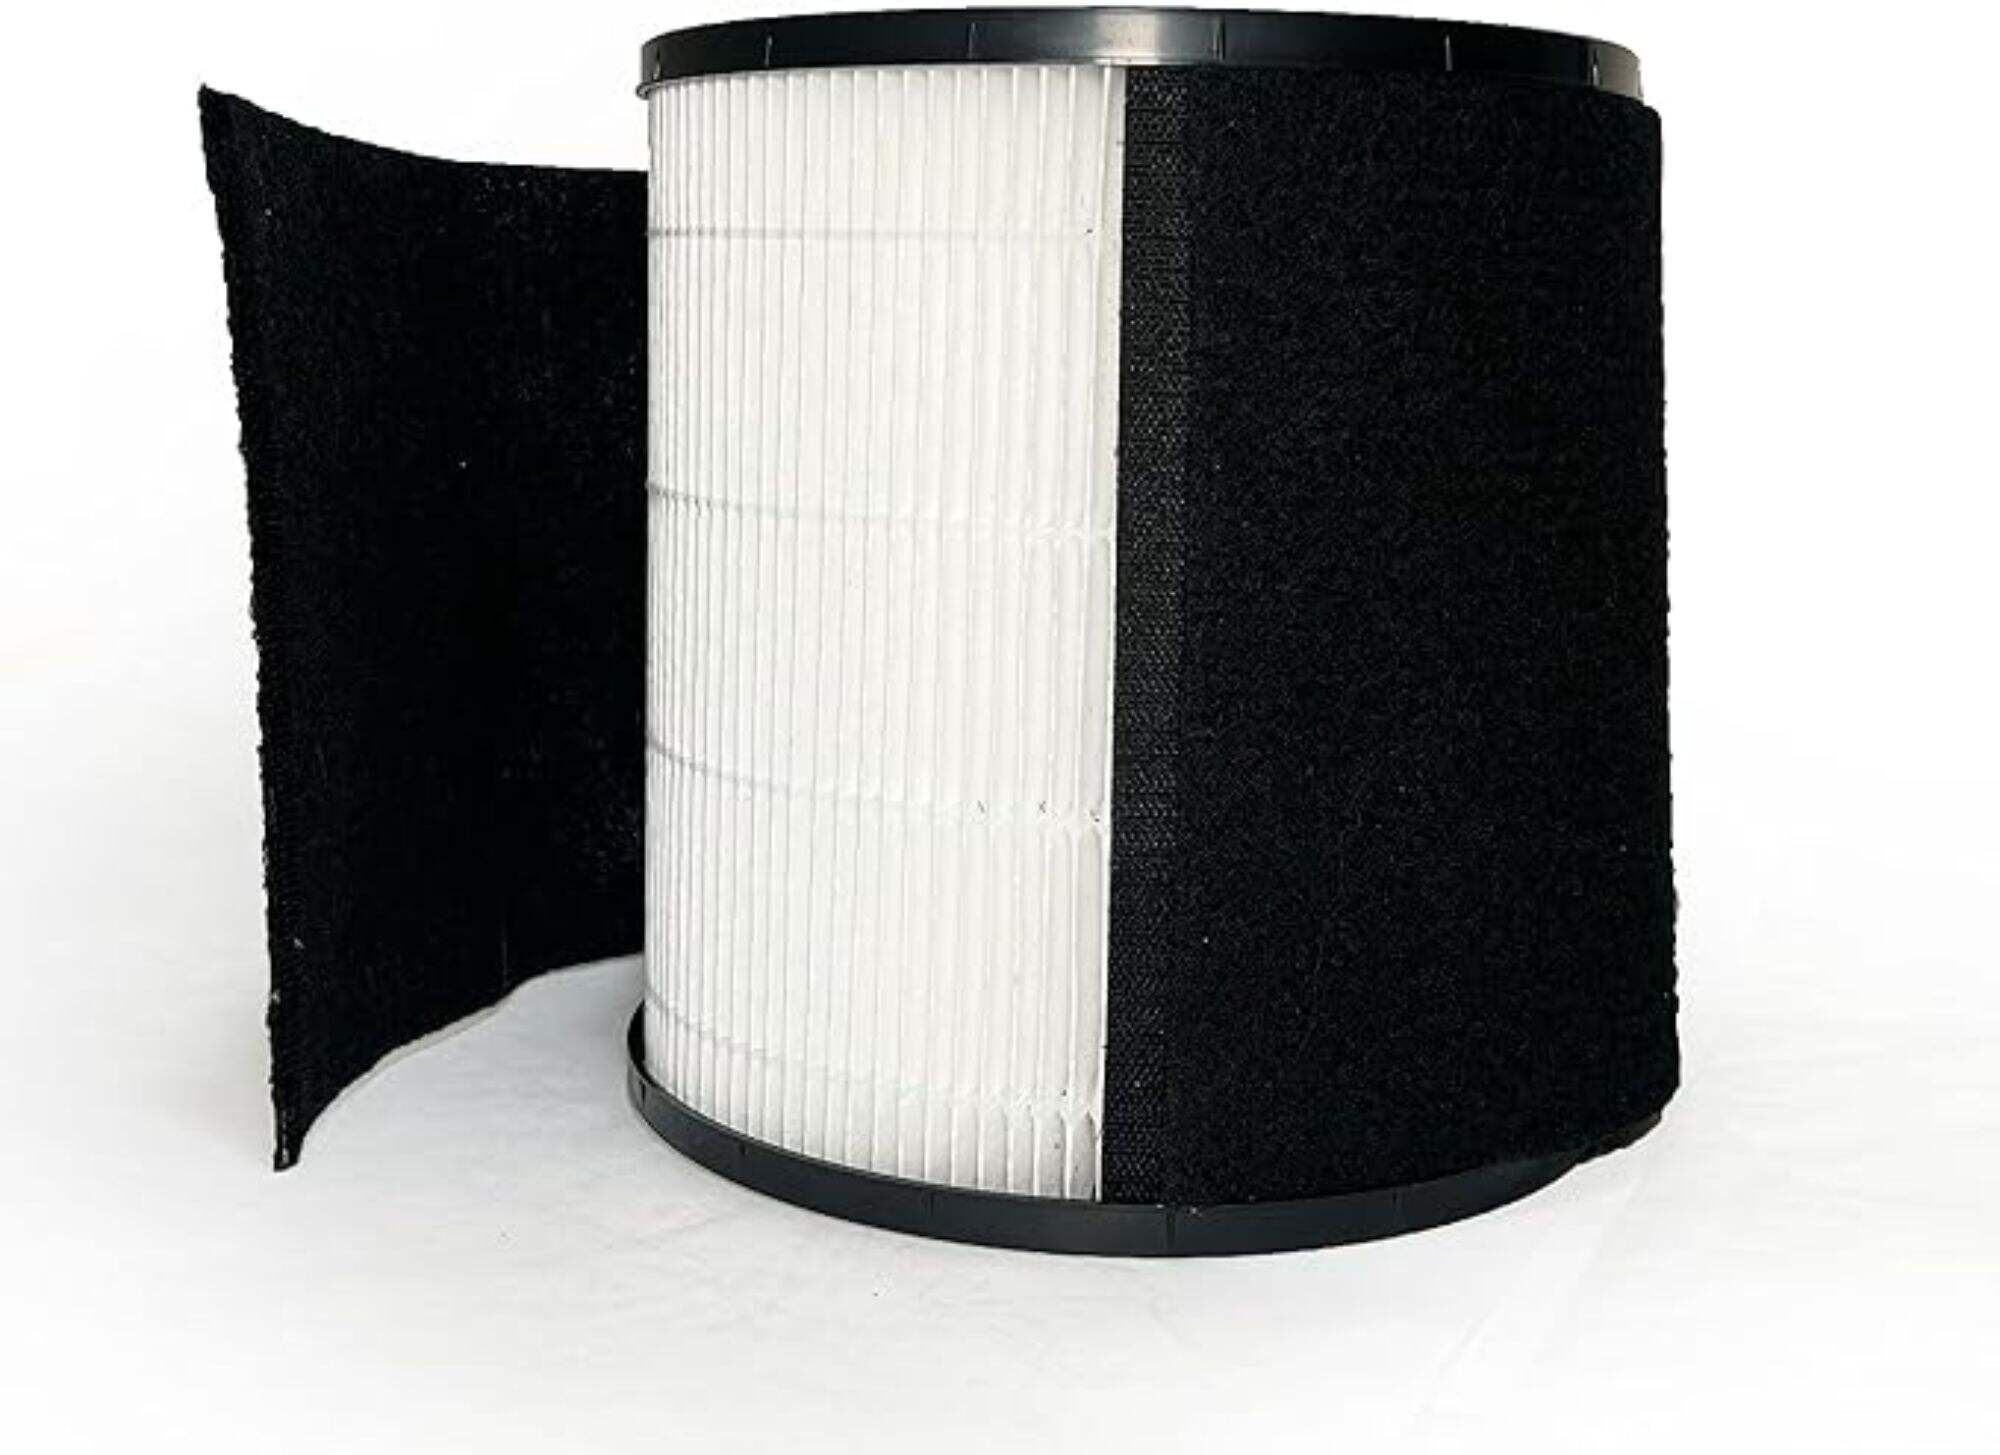 Premium  air purifier filter replacement for models TT-AP008with H13 hepa grade and carbon filter